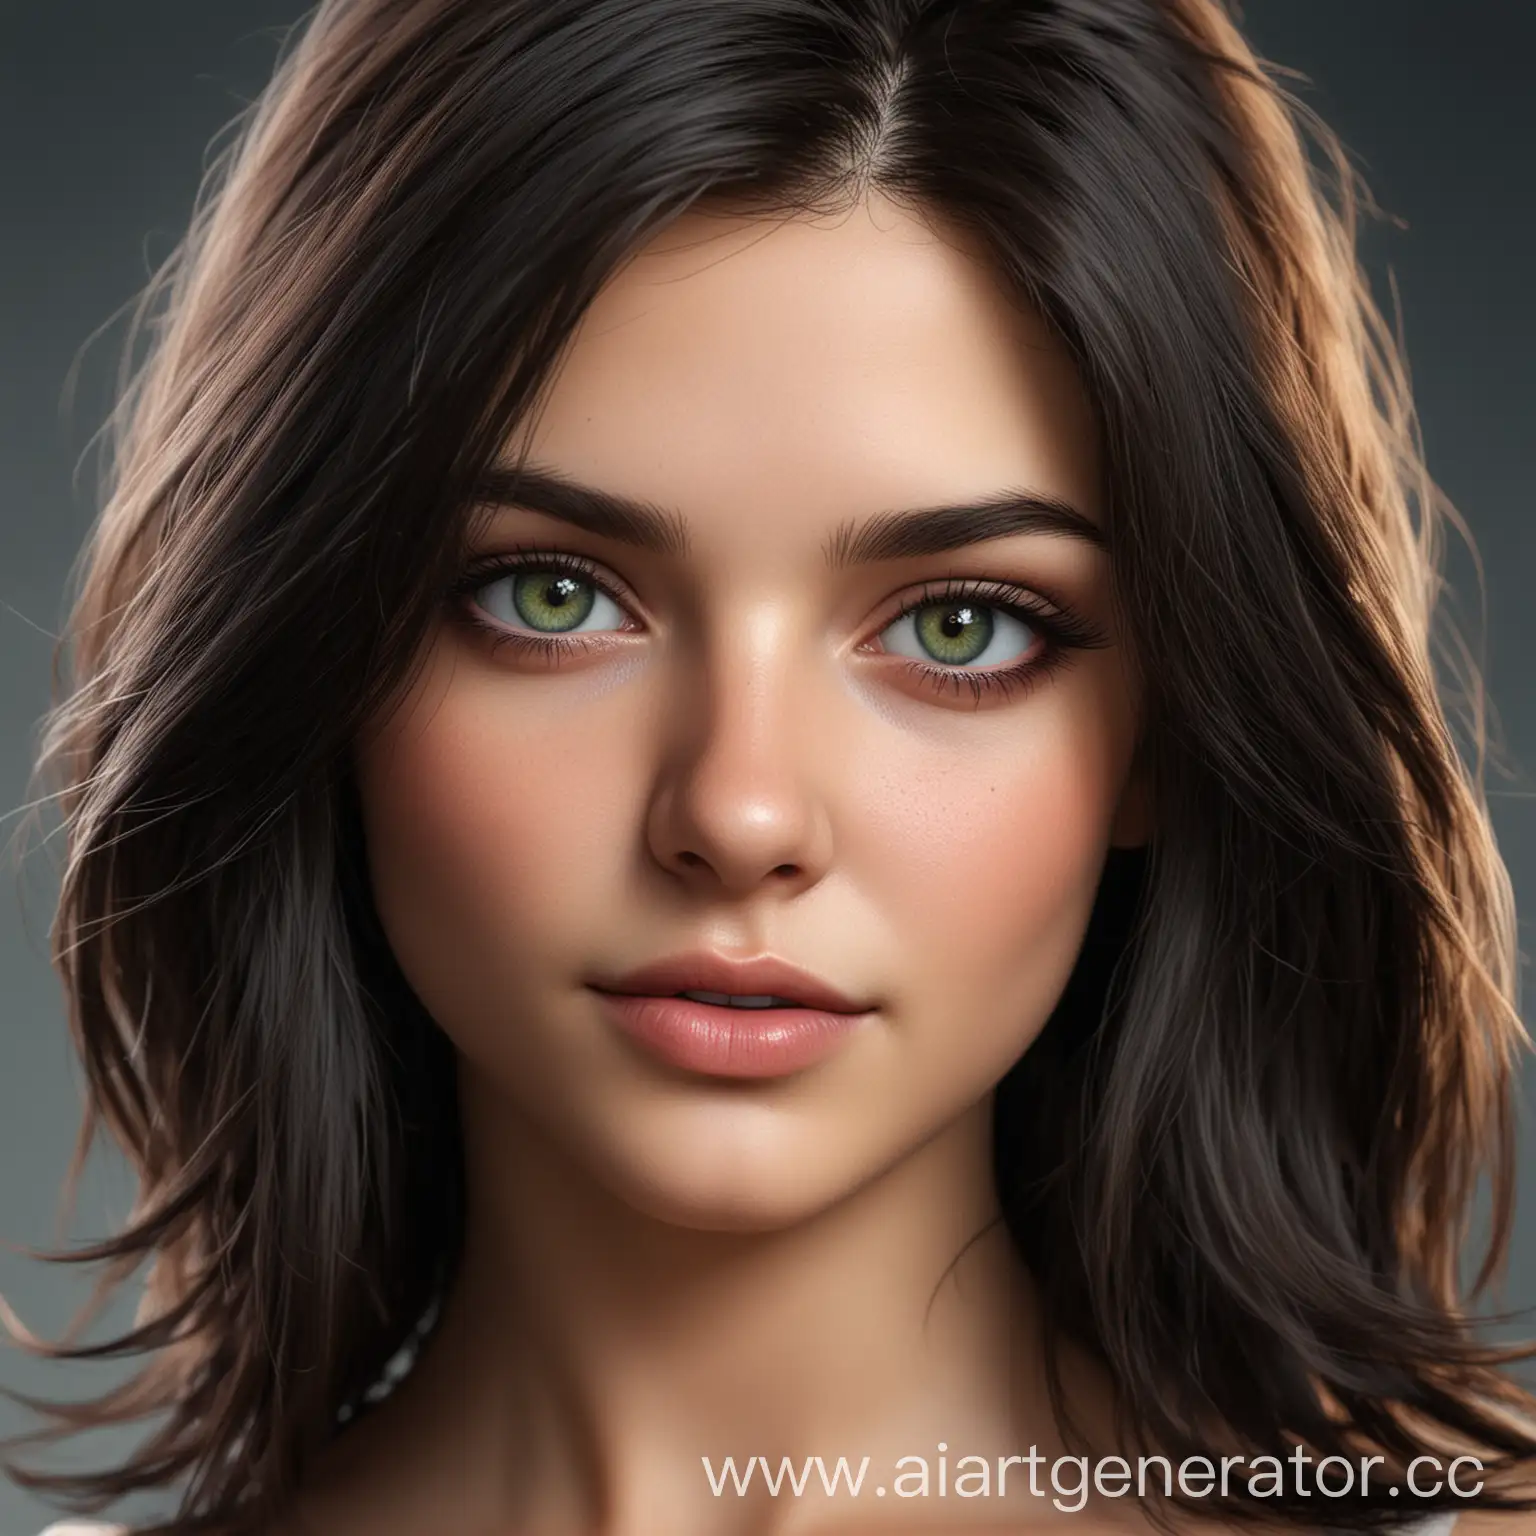 Realistic-Pretty-Girl-Portrait-with-Green-Eyes-and-Dark-Hair